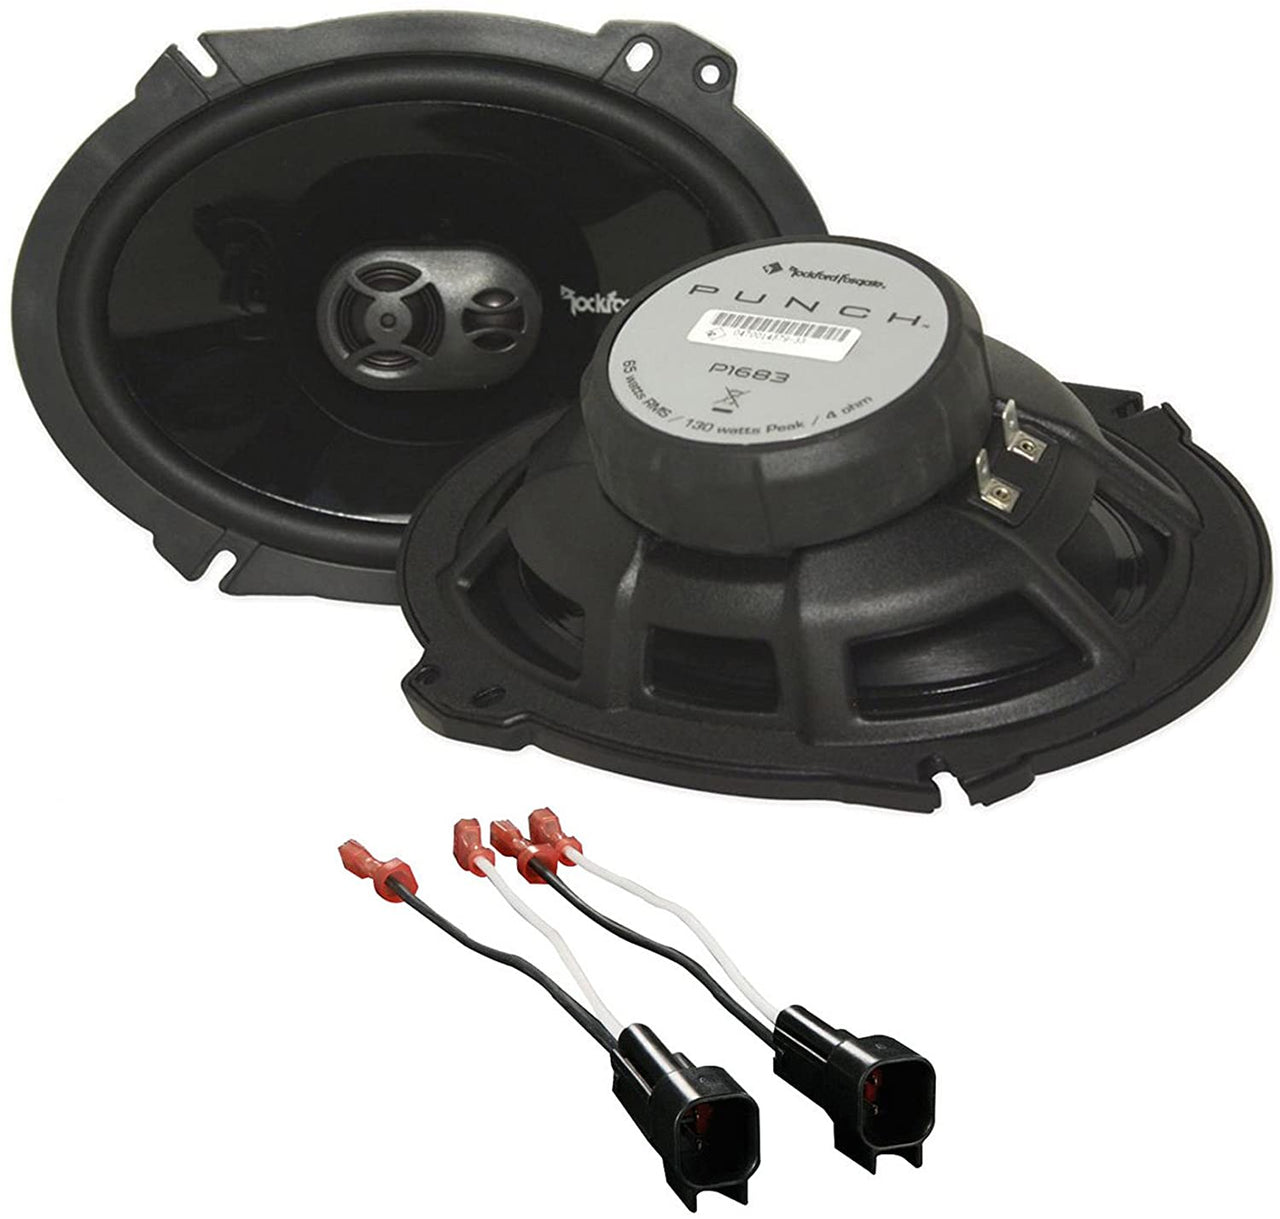 Rockford Fosgate P1683 6x8" Rear Speaker Replacement Kit & Absolute USA AS5600 Speaker Harness for 2007-2008 Ford F-150